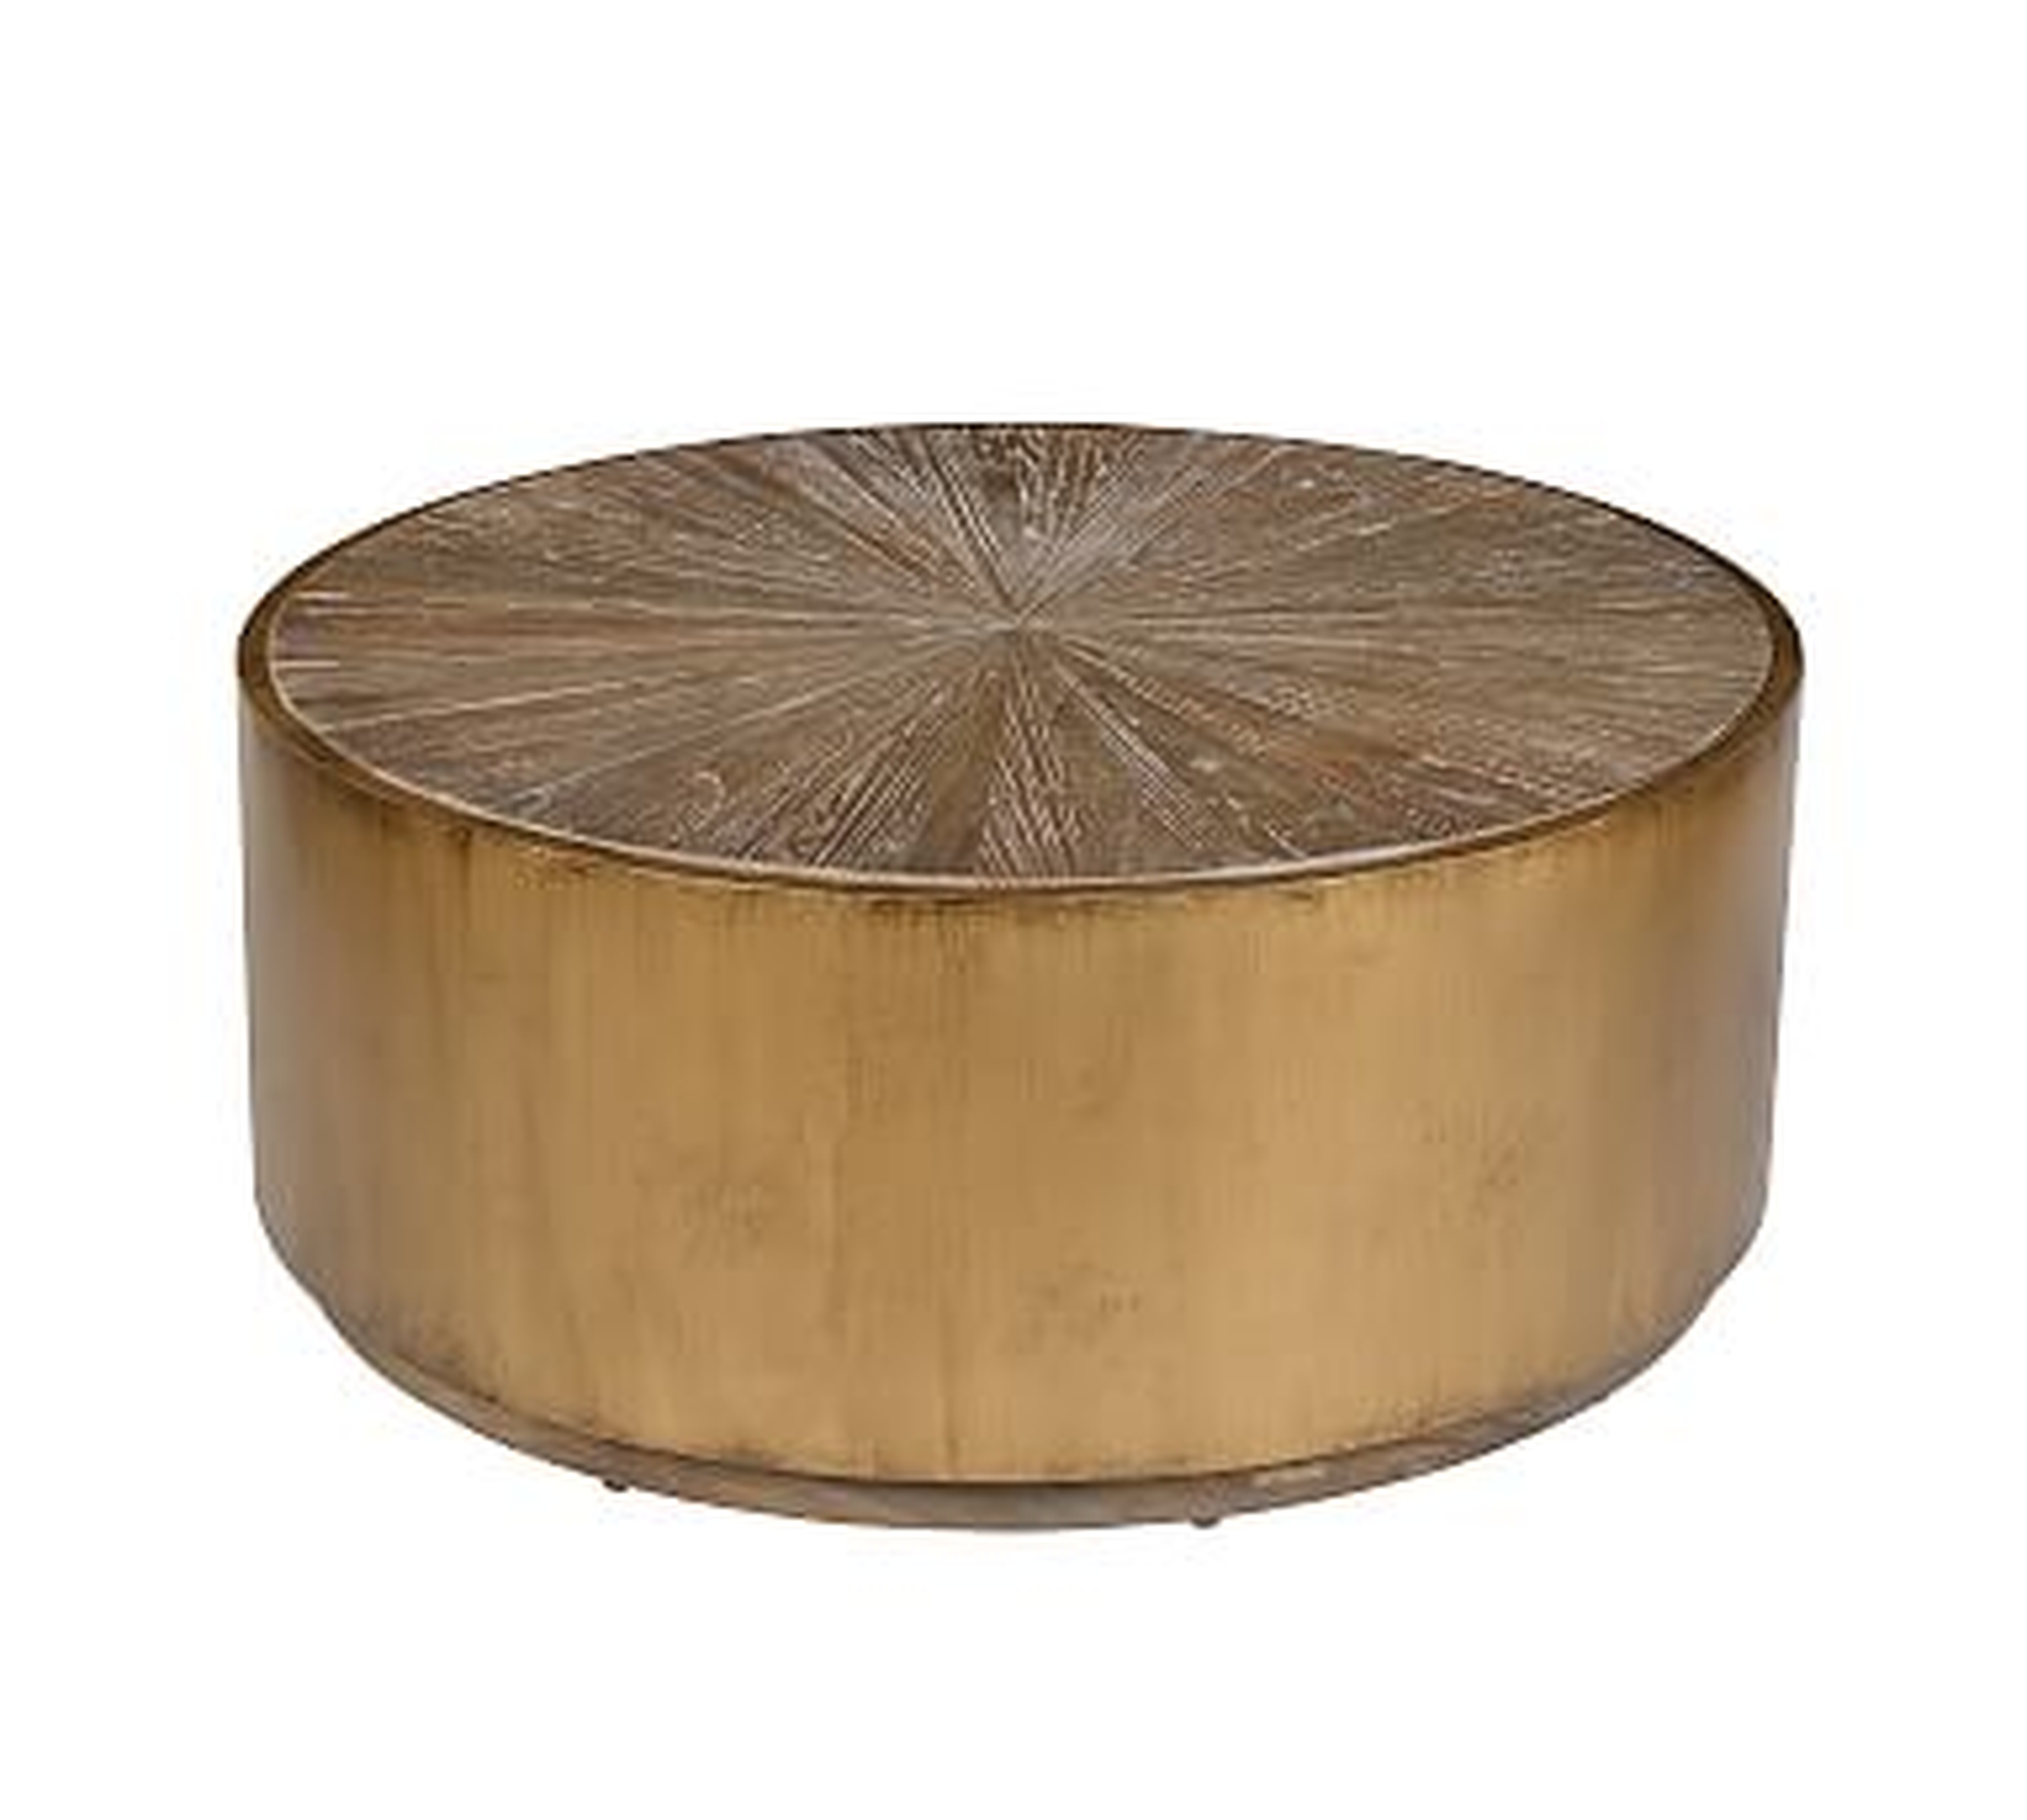 Brockton Metal Wrapped Reclaimed Wood Coffee Table, Antique Gold, 39.5"L - Pottery Barn